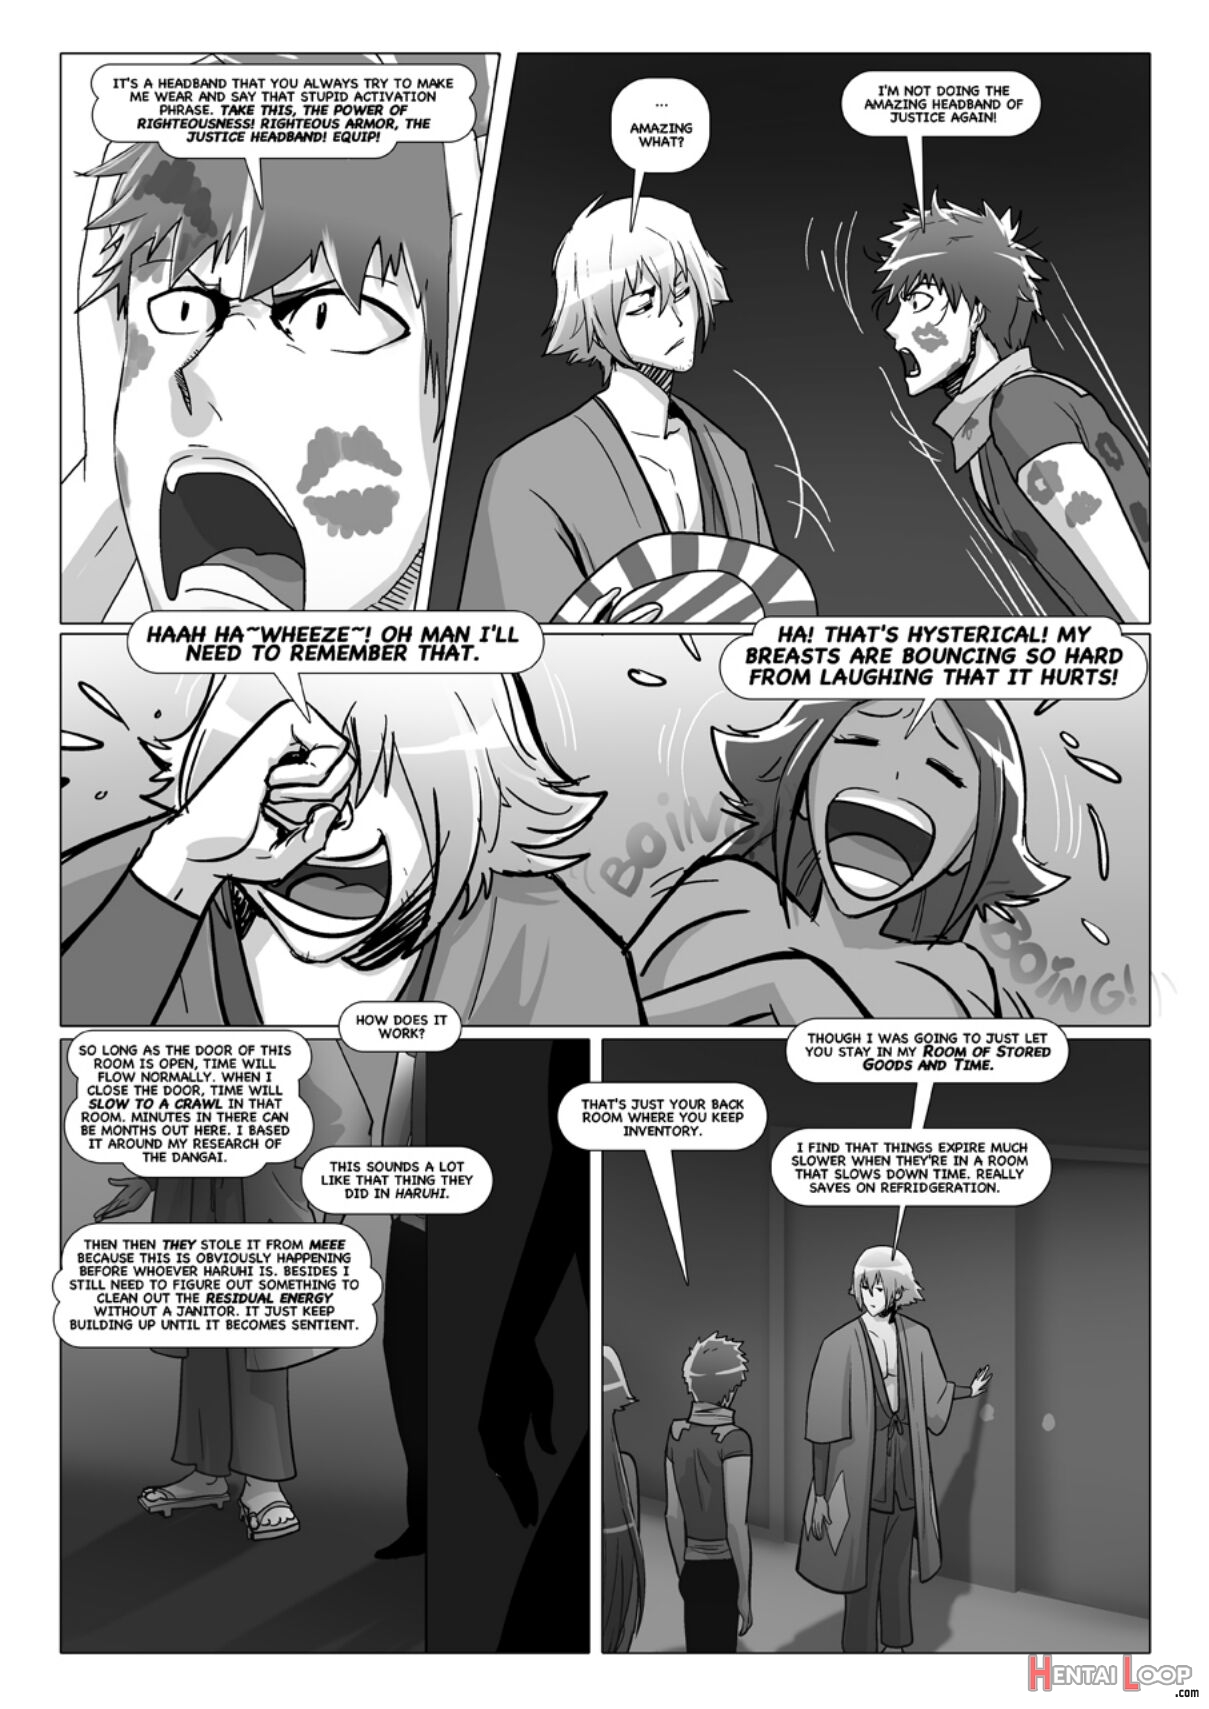 Happy To Serve You - Xxx Version page 468